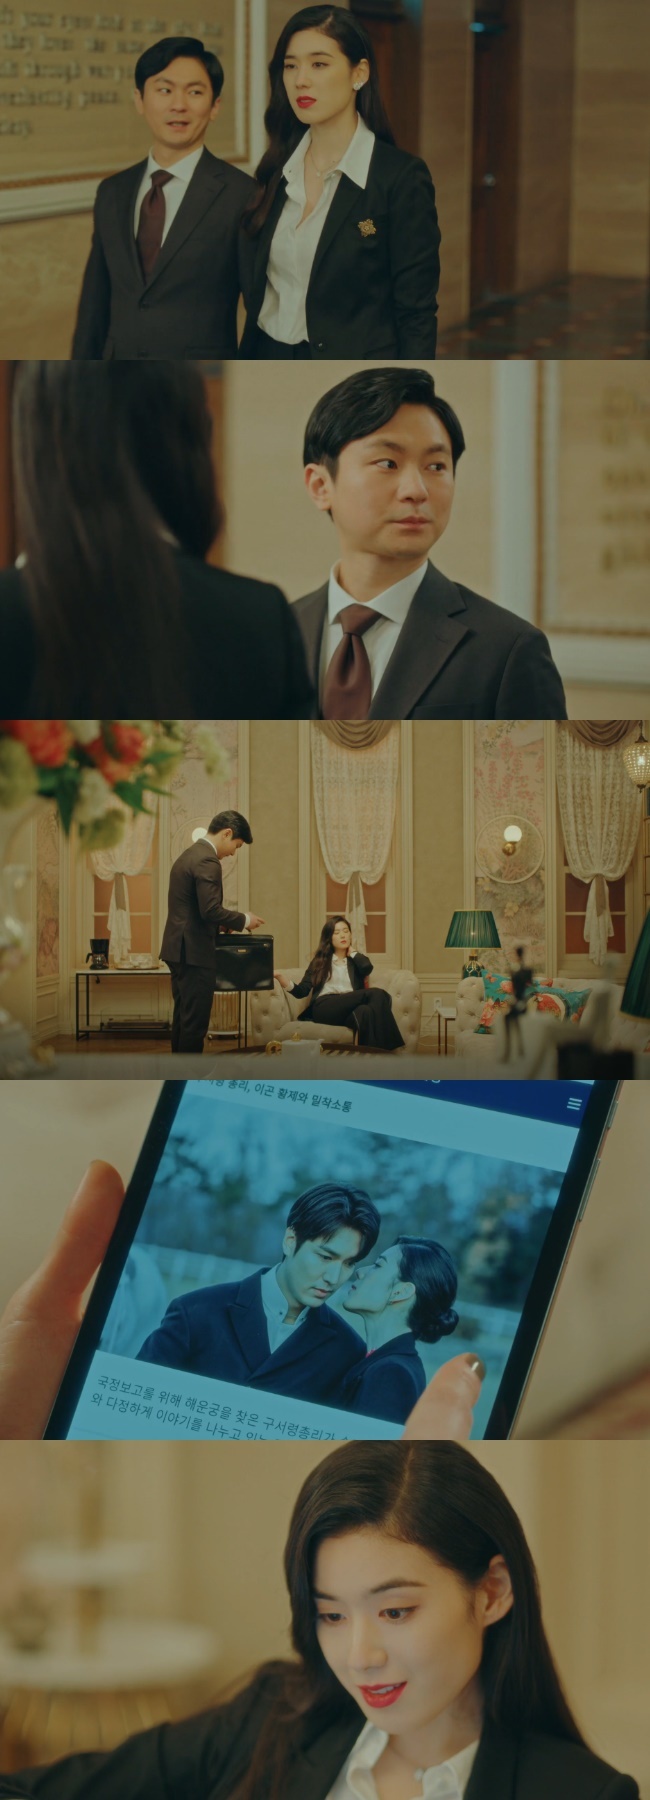 Jung Eun-chae showed his desire for Lee Min-ho.In the second episode of SBS gilt drama The King: The Monarch of Eternity (playplayed by Kim Eun-sook/directed by Baek Sang-hoon and Jung Ji-hyun), which aired on April 18, Koo Seo-ryeong (played by Jung Eun-chae) found out that Lee Gon (played by Lee Min-ho) has disappeared somewhere else.After the meeting, Koo said, They are all rice bowls. I thought if I were prime minister, I would meet only a nice man.Guseo-ryeong was informed of his work report and heard that his schedule was in a disturbance for a week. He said, Is the Emperor splashed again?If the Emperor has a woman, it should be me, he said. The whole nation is making me know that. What if there is a woman?Are you pretty?Lee Ha-na